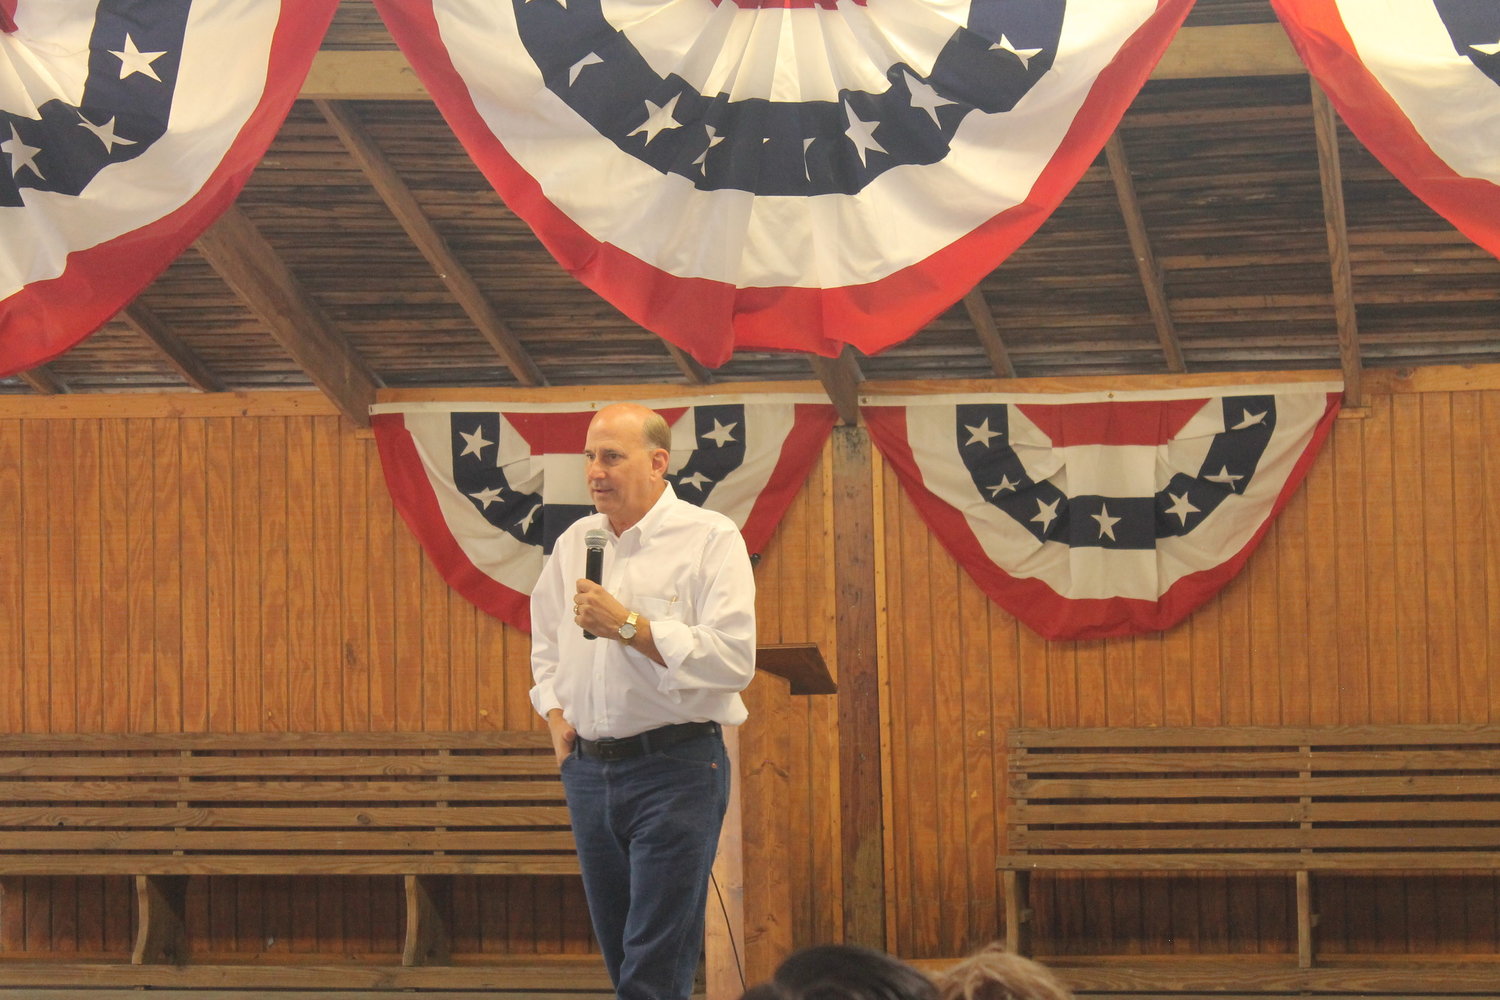 U.S. Congressman Louie Gohmert stressed the importance of voting and getting others to vote Republican during Sunday’s Get out the Vote rally in Quitman. (Monitor photo by Micah Brooks)